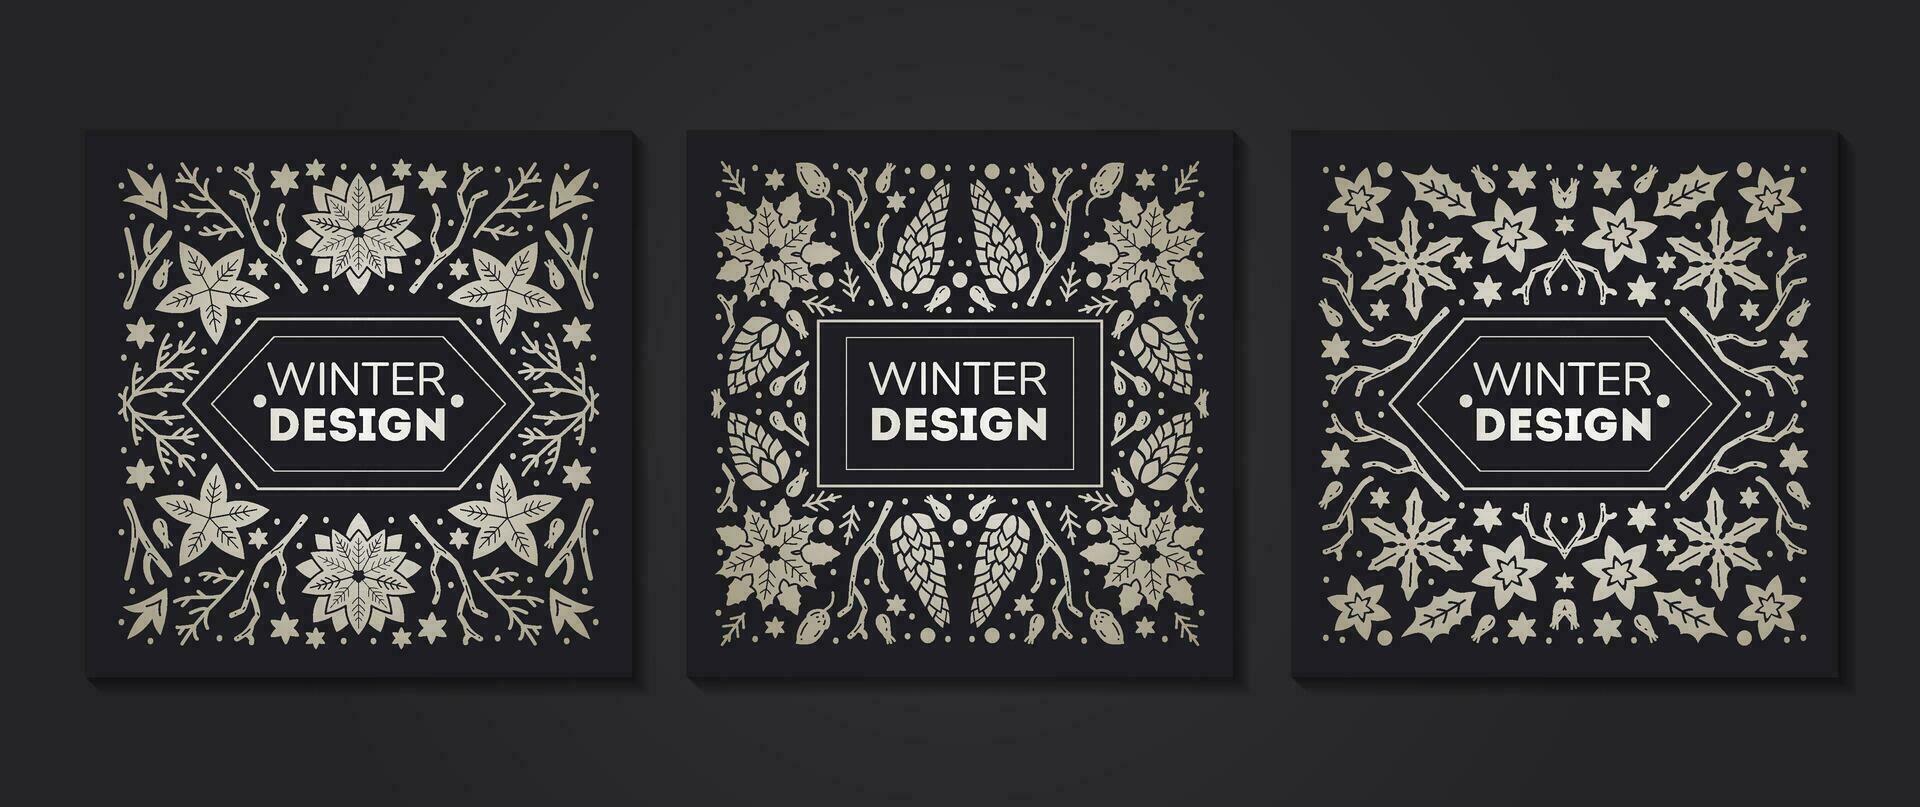 Luxury Christmas frame, abstract sketch winter design templates for package vector